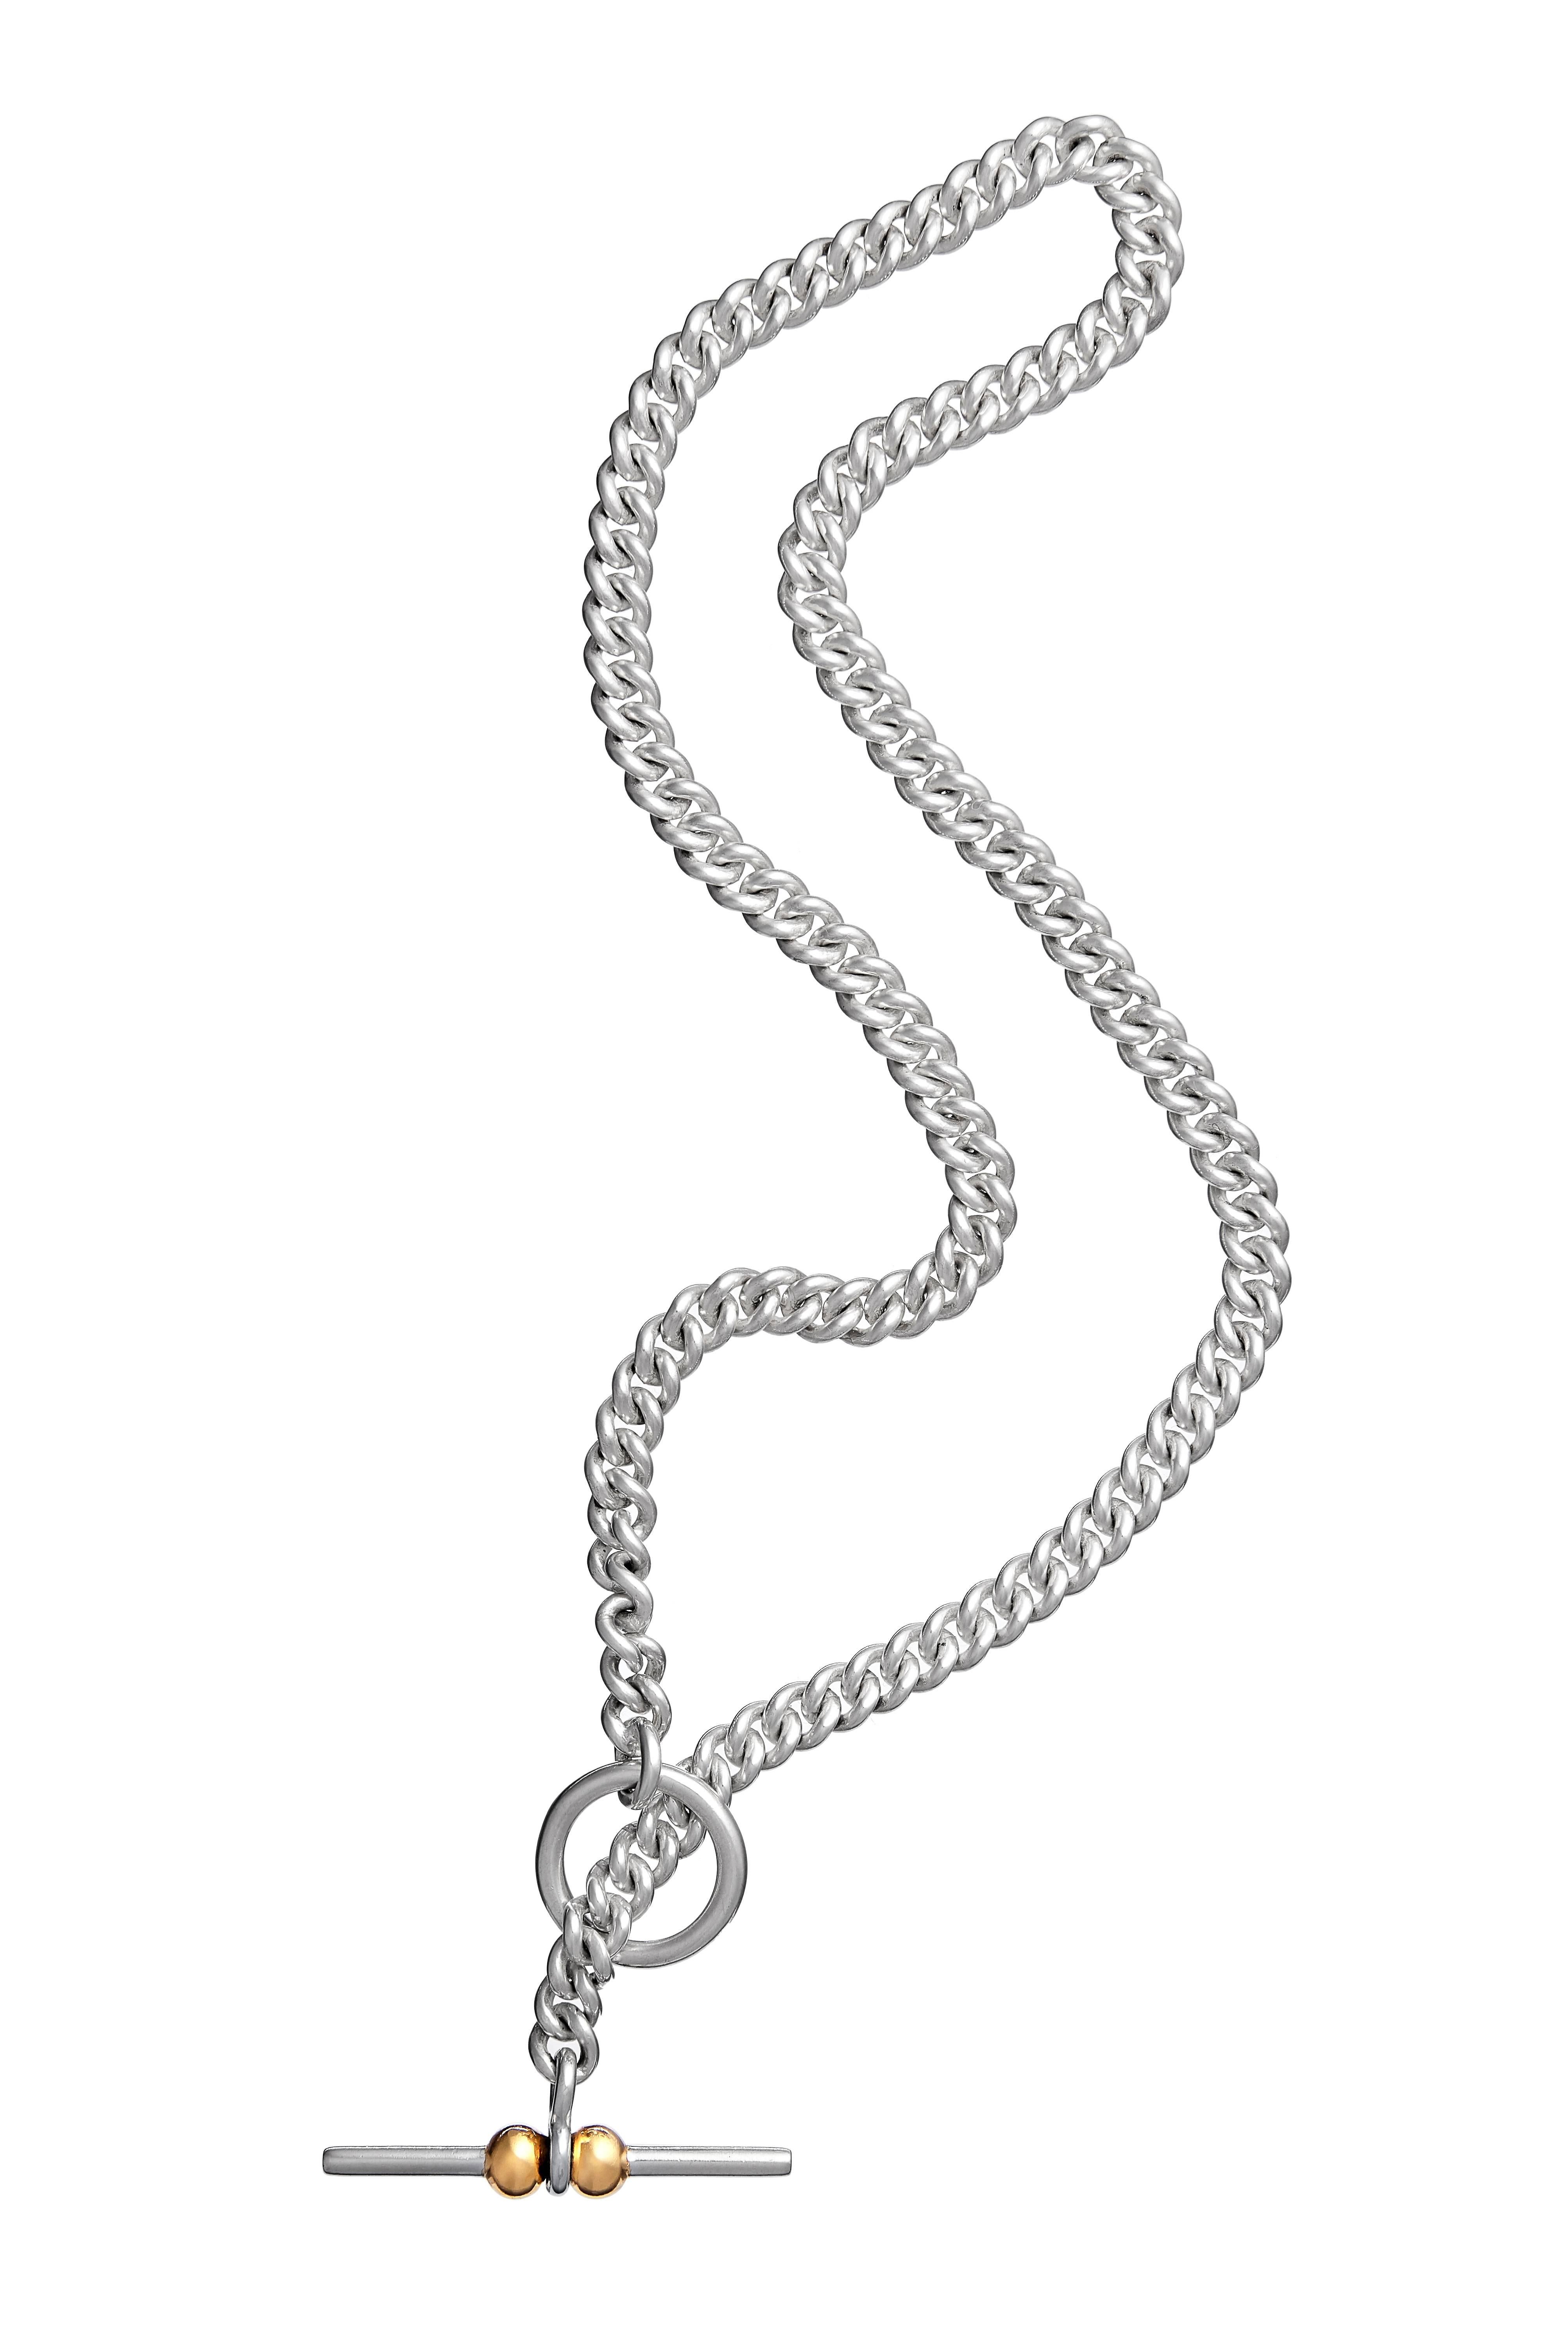 Inspired by antique fob chains found on pocket watches this is a clean contemporary twist. The necklace is made from 6mm silver curb chain, the piece has a substantial weight whilst still being elegant and simply. Fastened at the with a classic